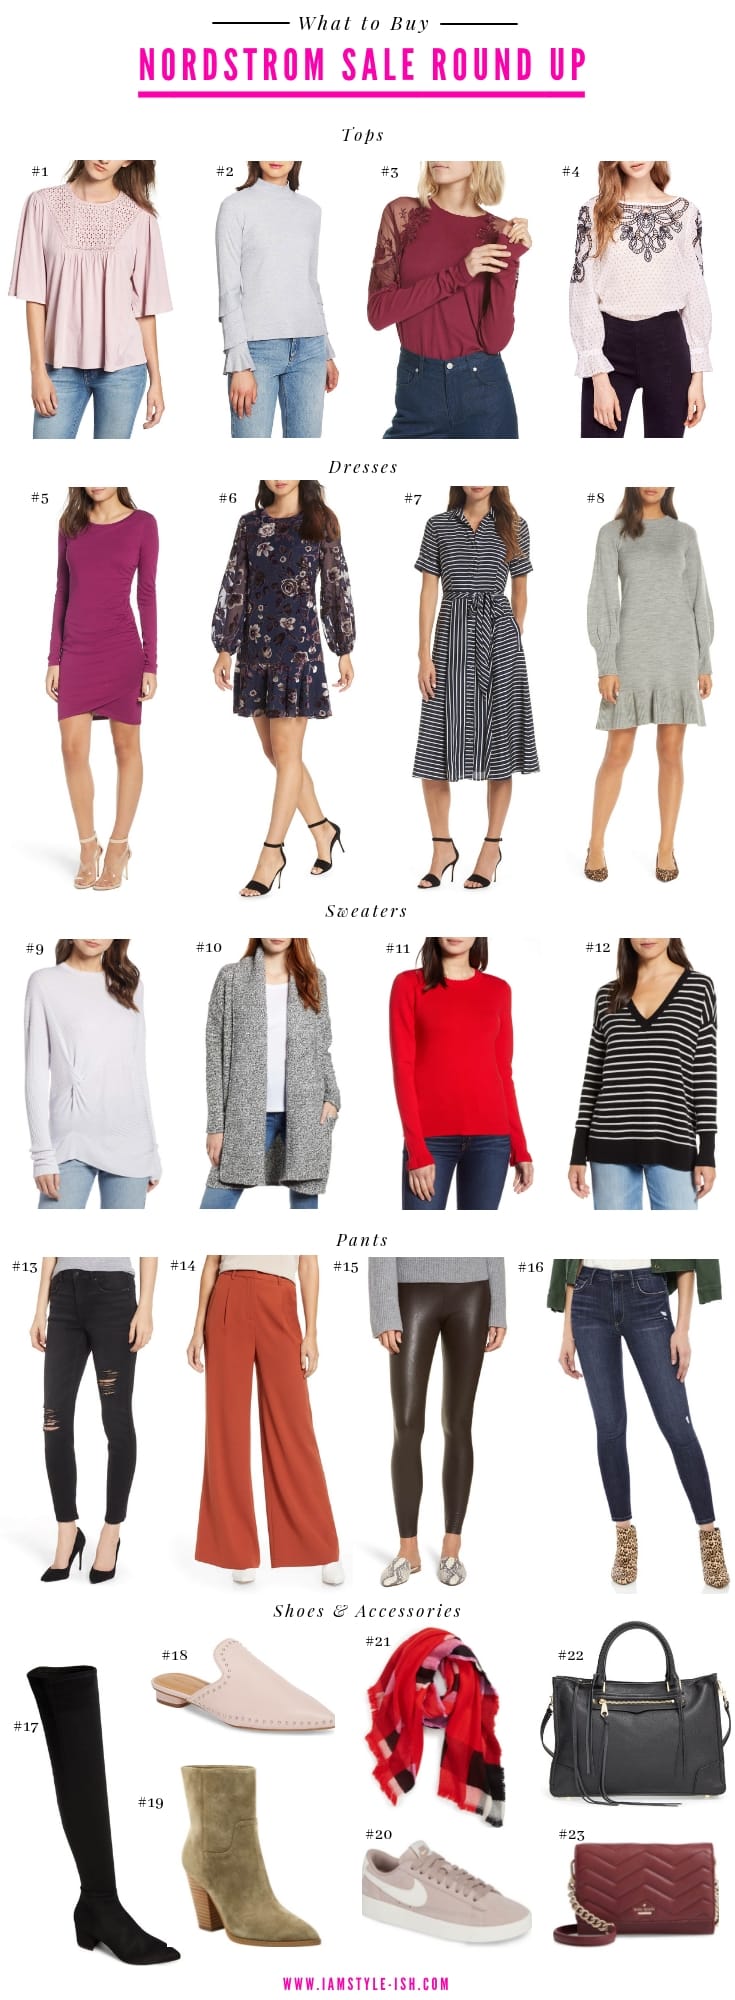 nordstrom sale round up, 2018 Nordstrom sale, best deals for holiday sales, clothing and accessories sale haul 